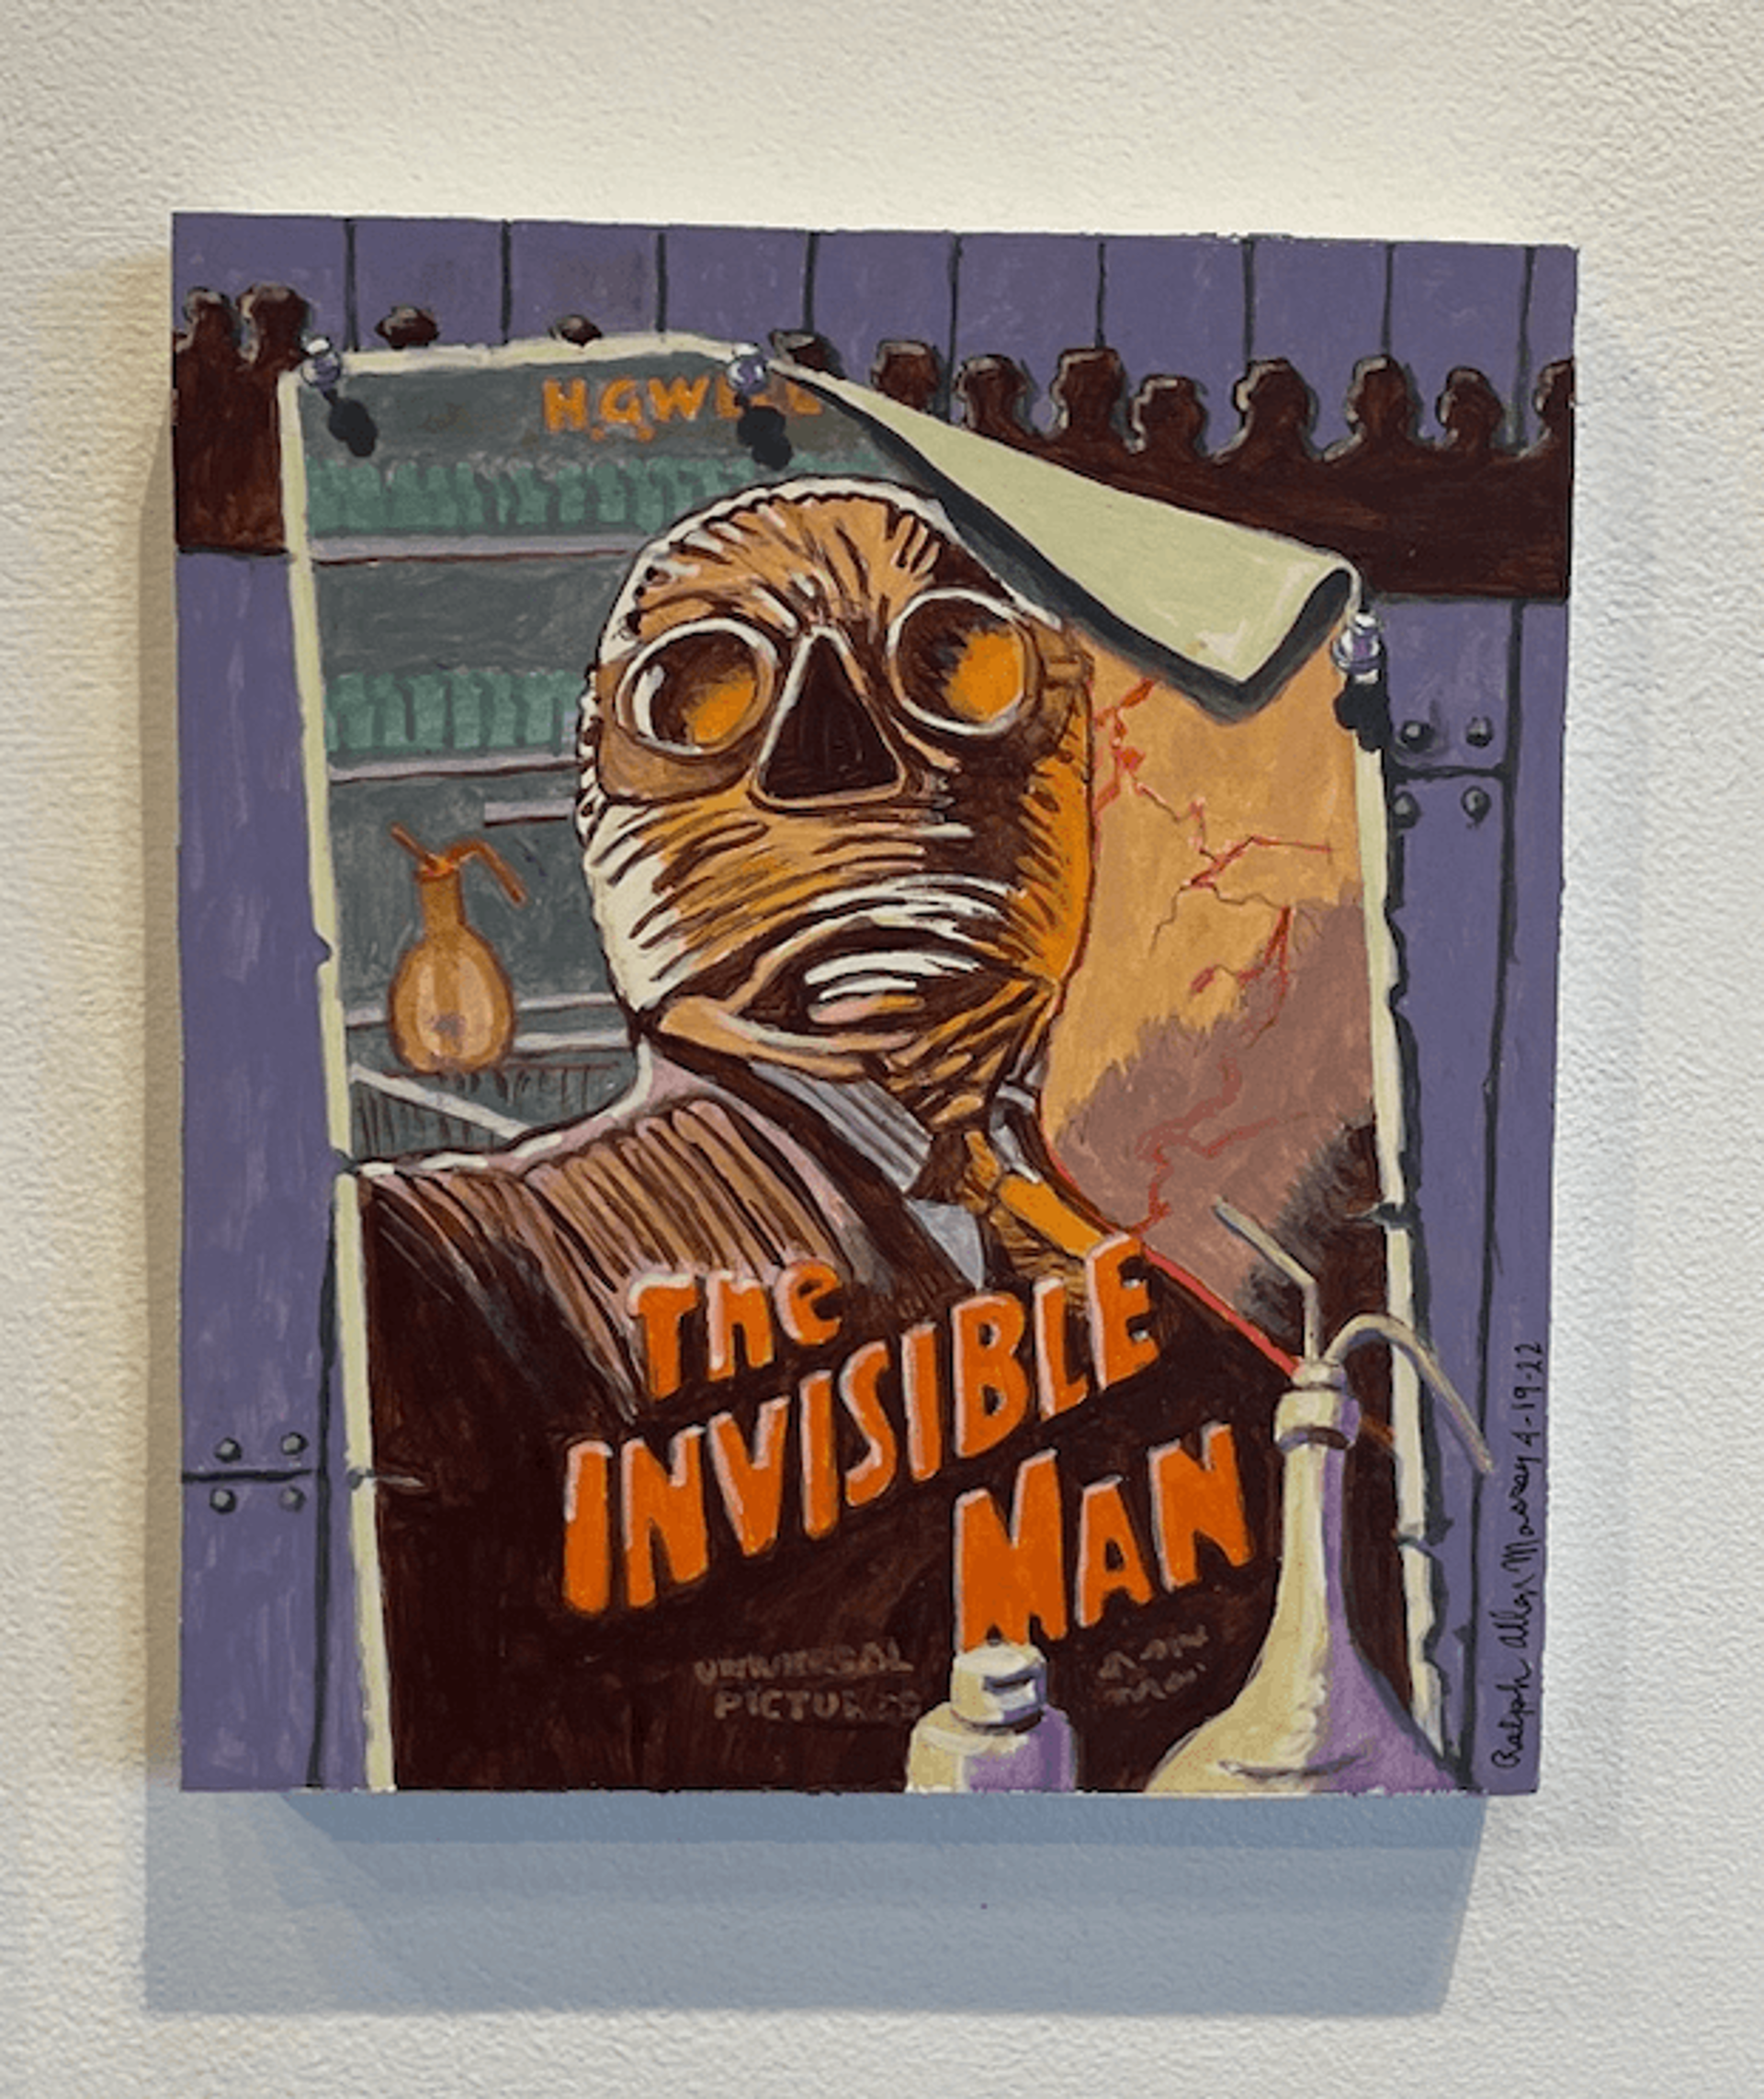 The Invisible Man offset #1 by Ralph Allen Massey